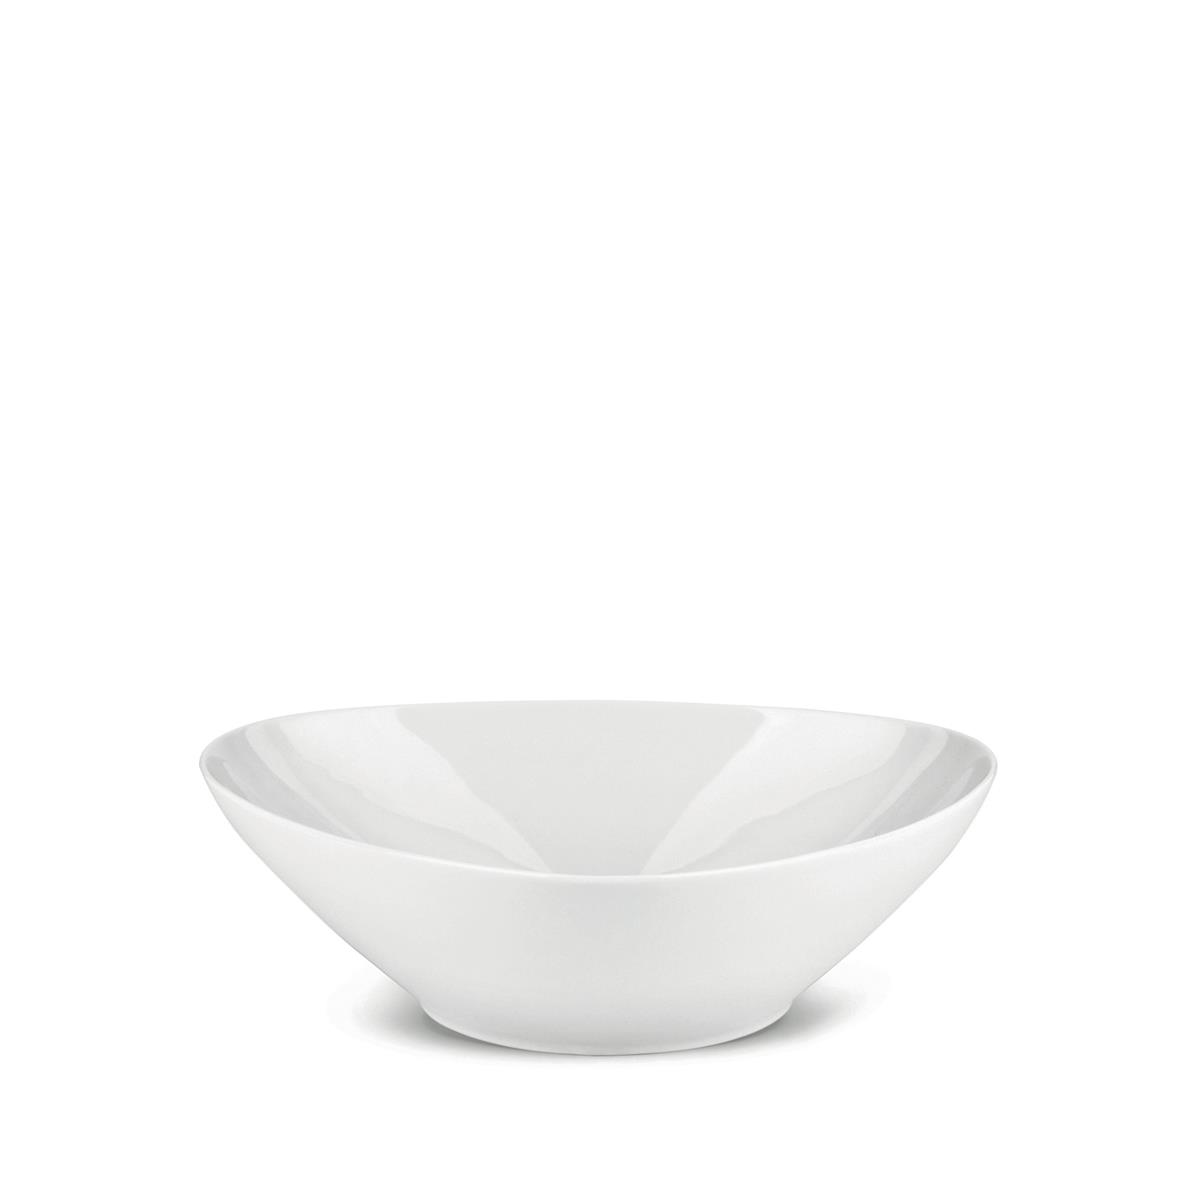 Alessi-Oval serving plate in 18/10 satin stainless steel with polished edge